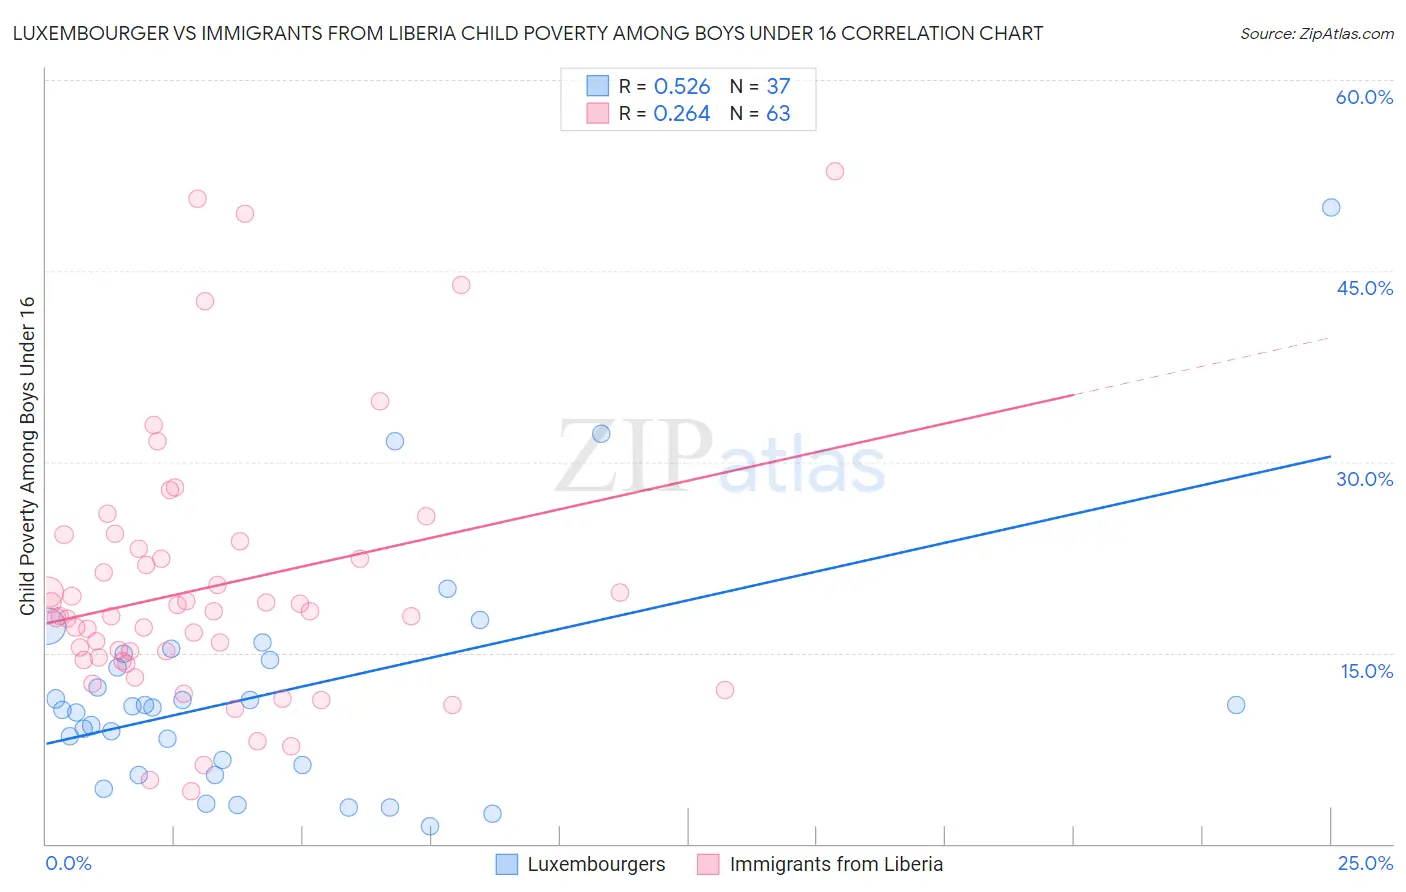 Luxembourger vs Immigrants from Liberia Child Poverty Among Boys Under 16